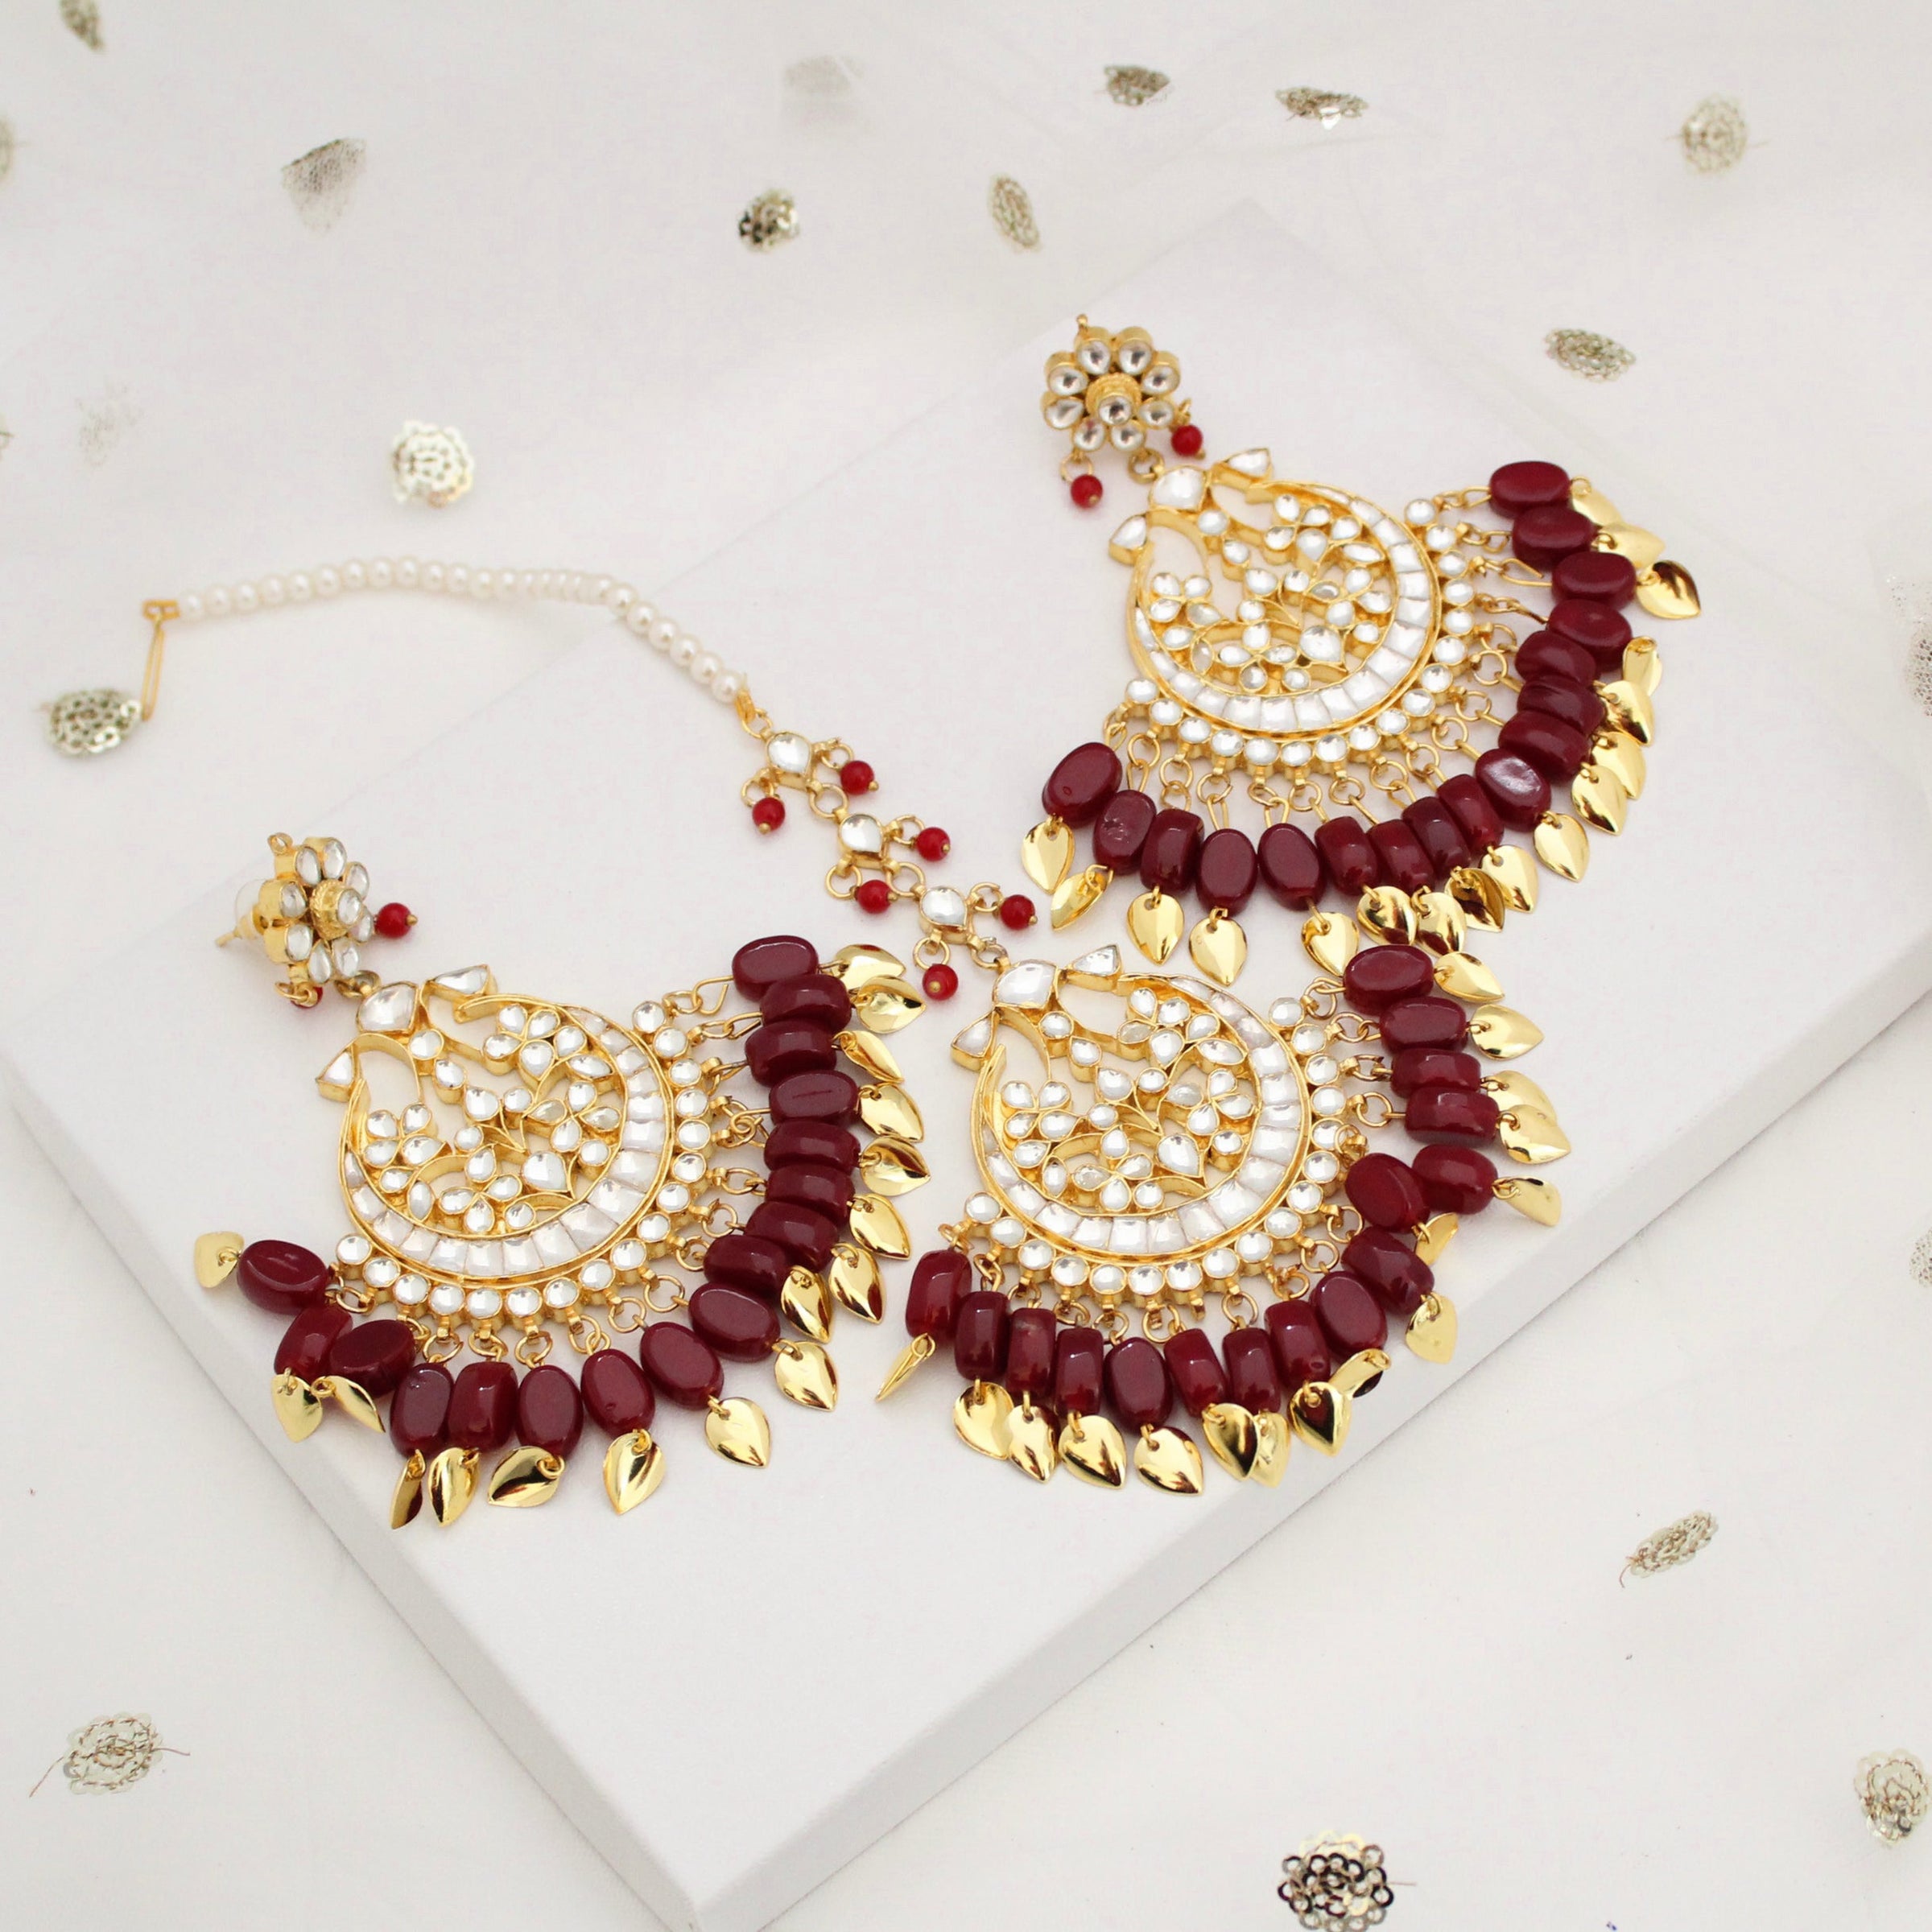 Gold Plated Beaded Peepal Patti Hoops - PINK PITCH - 2366689